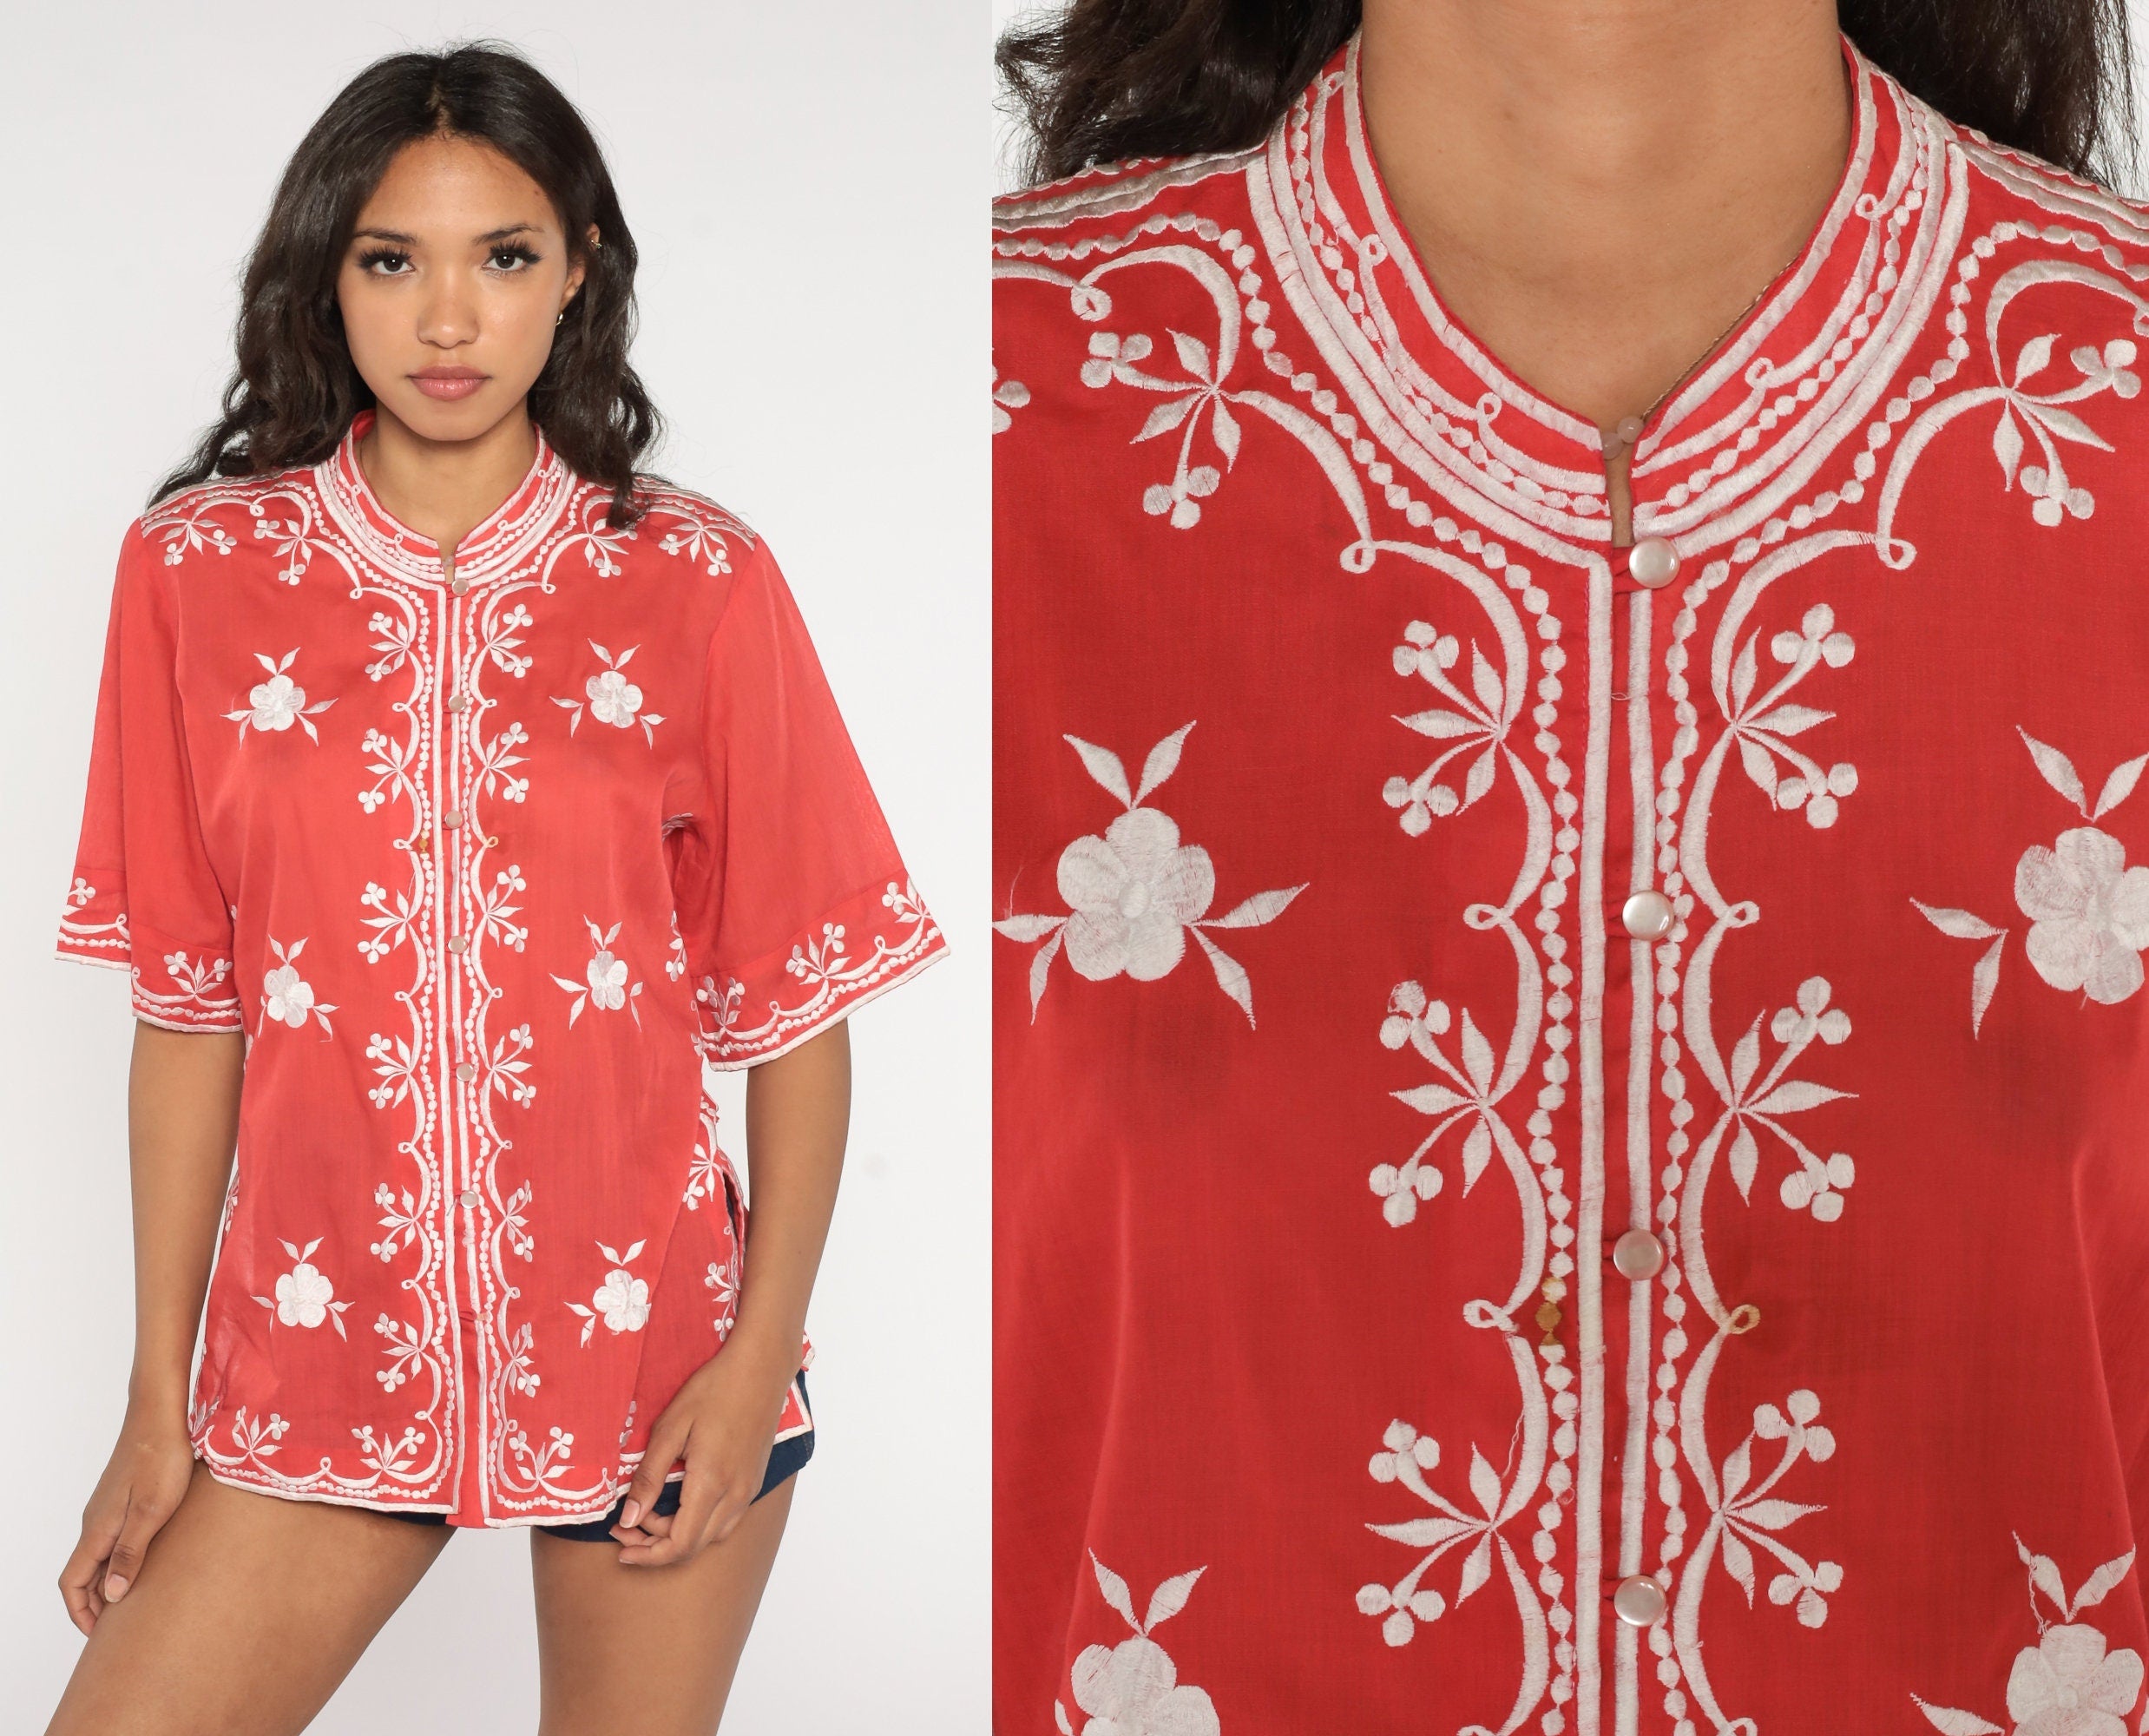 Red Floral Blouse 70s Boho Top Semi-Sheer Embroidered Button Up